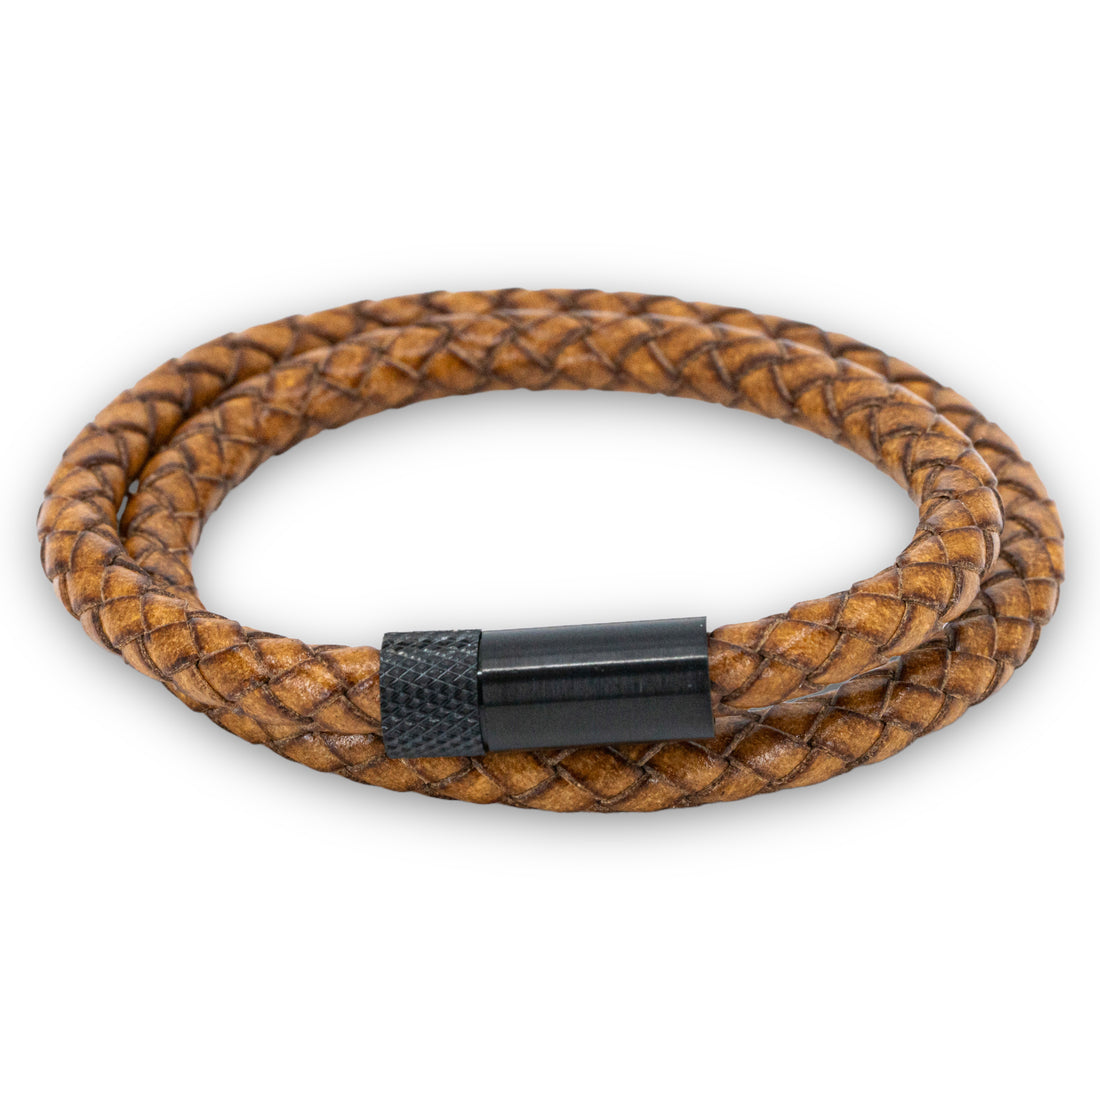 RUIGG - Brown braided double round leather 6mm bracelet